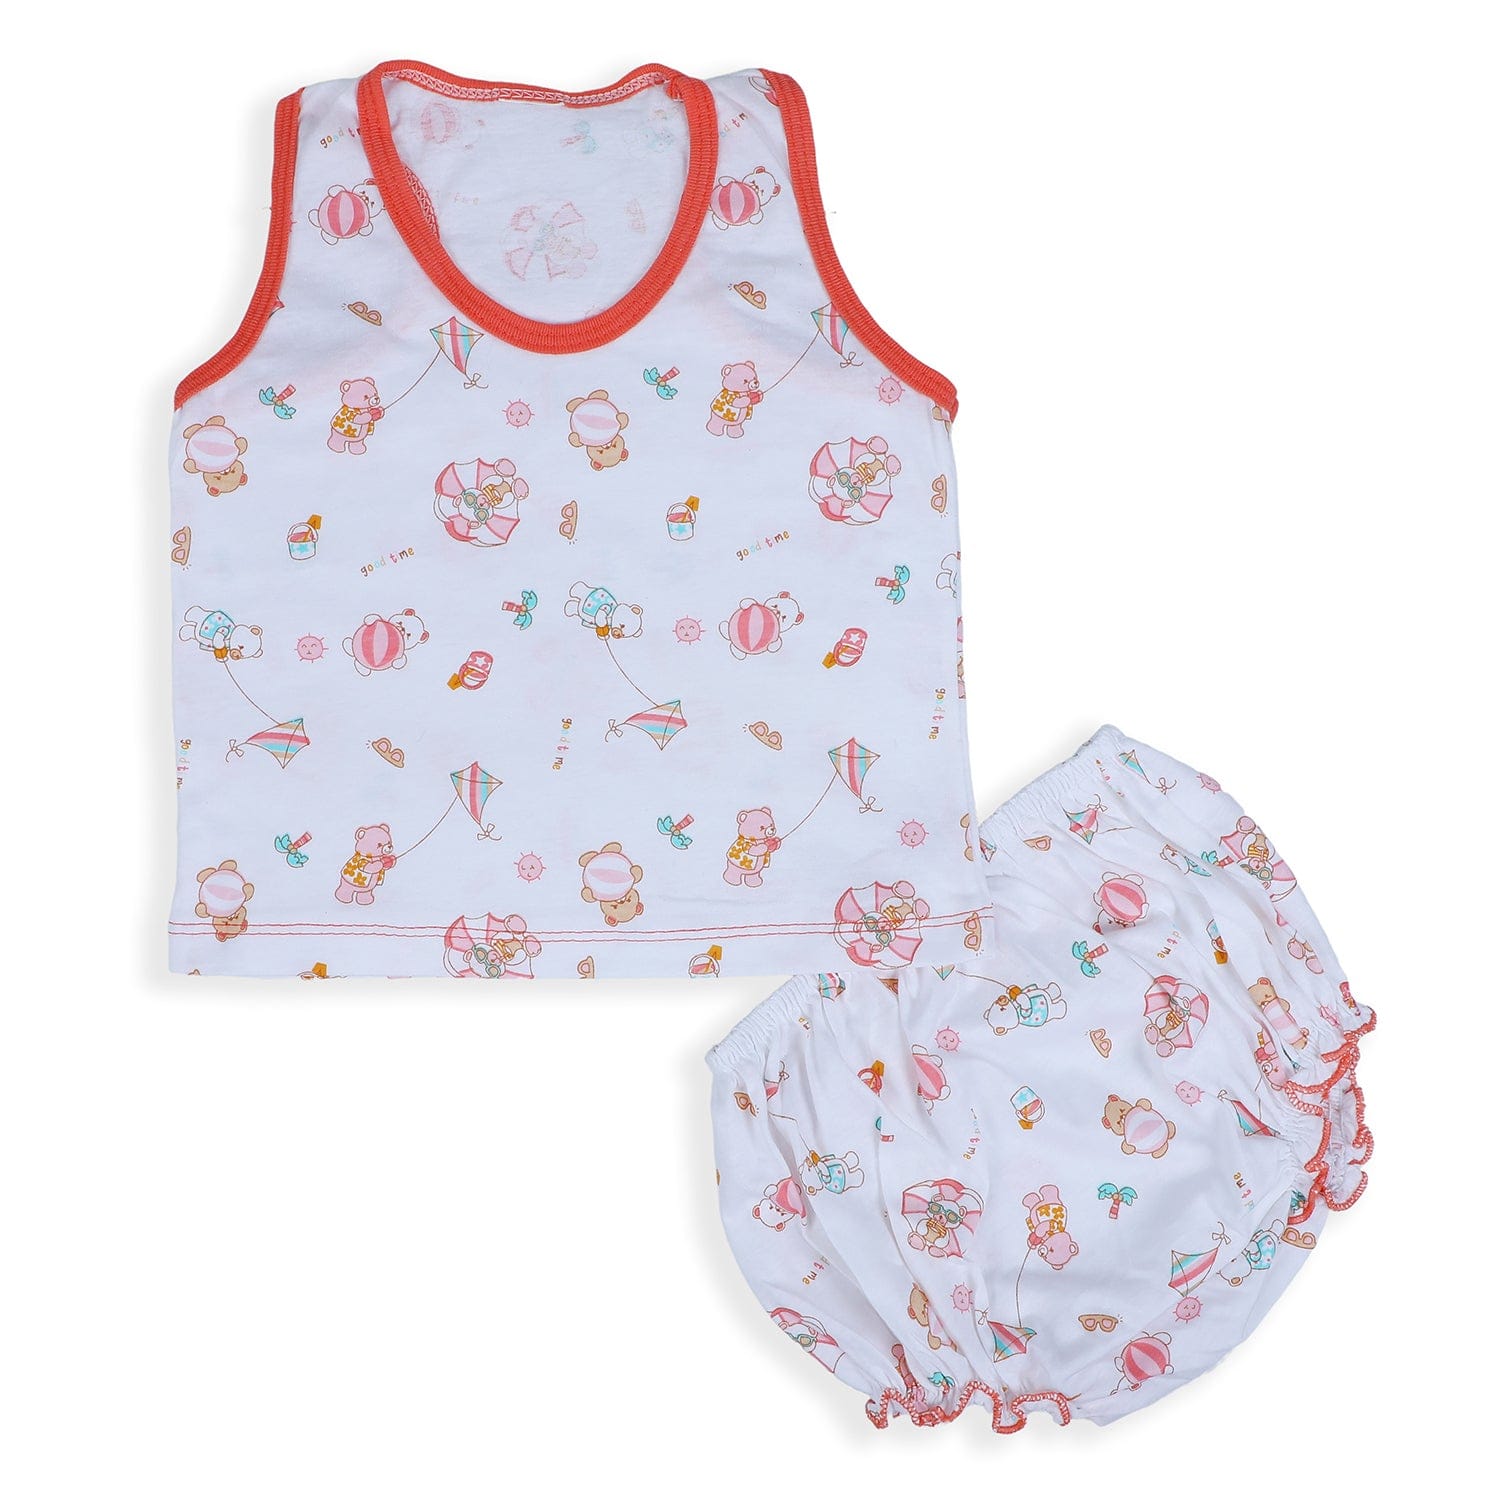 Baby Moo Kite Flying Bear Pure Cotton 2 Sleeveless Vest With 2 Matching Bottom - Red & Blue - Baby Moo